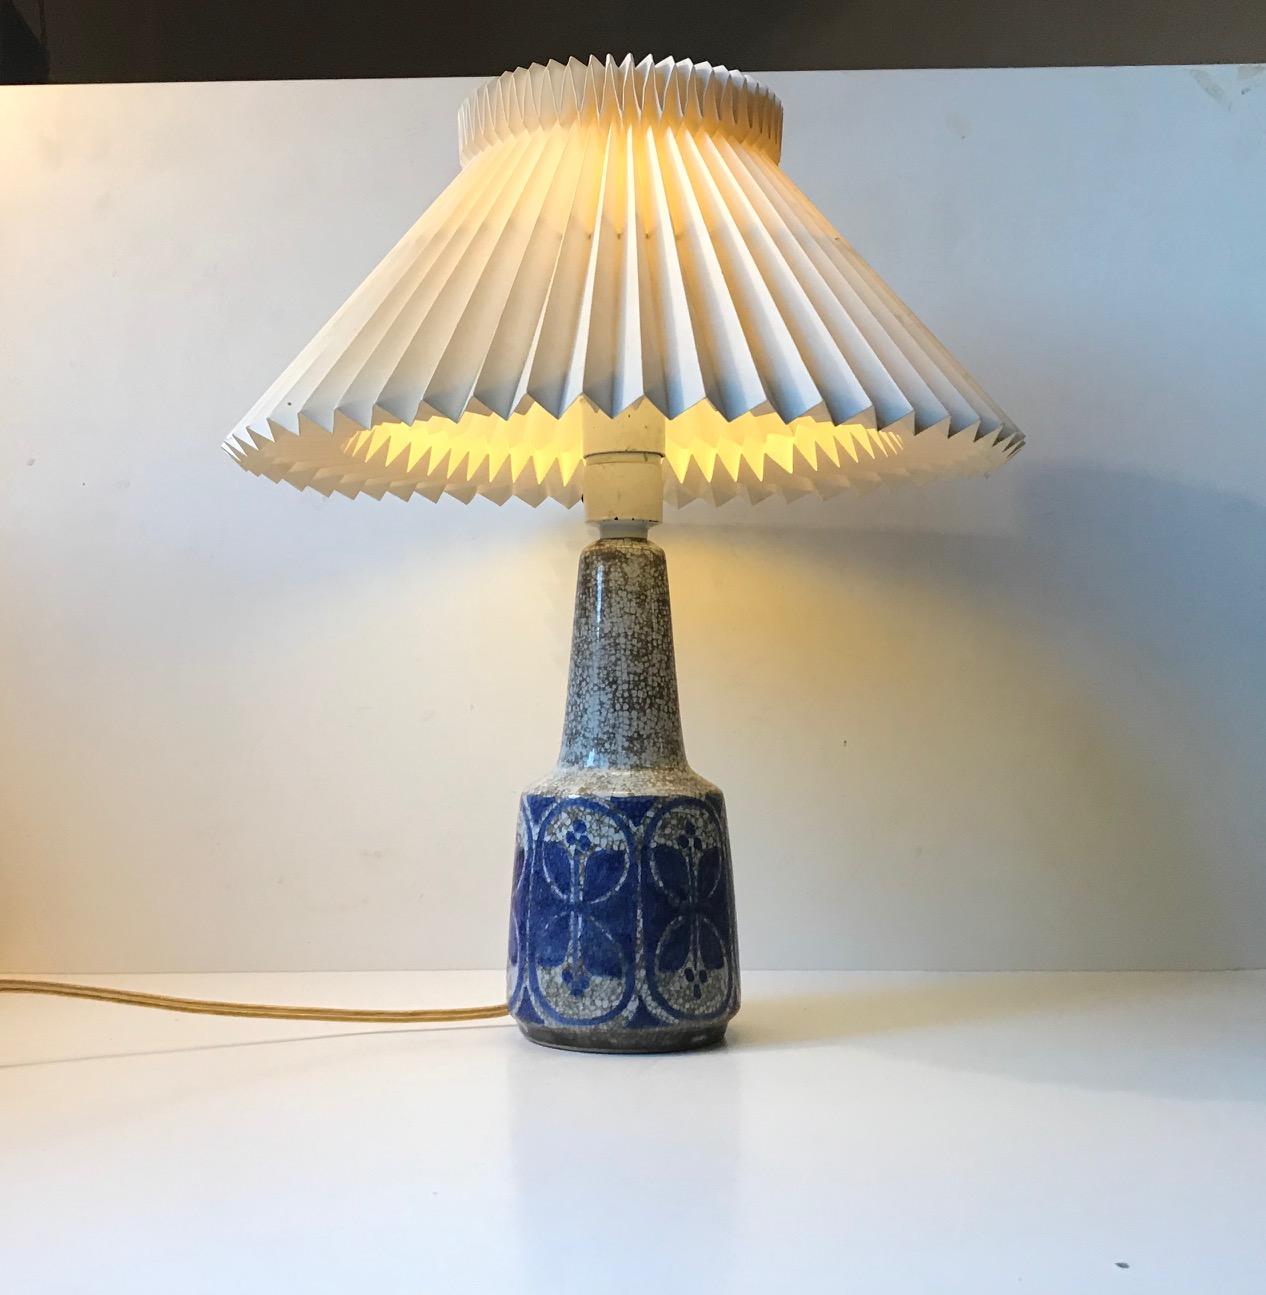 Danish Marianne Starck Stoneware Table Lamp with Persia Crackle Glaze, Denmark, 1970s